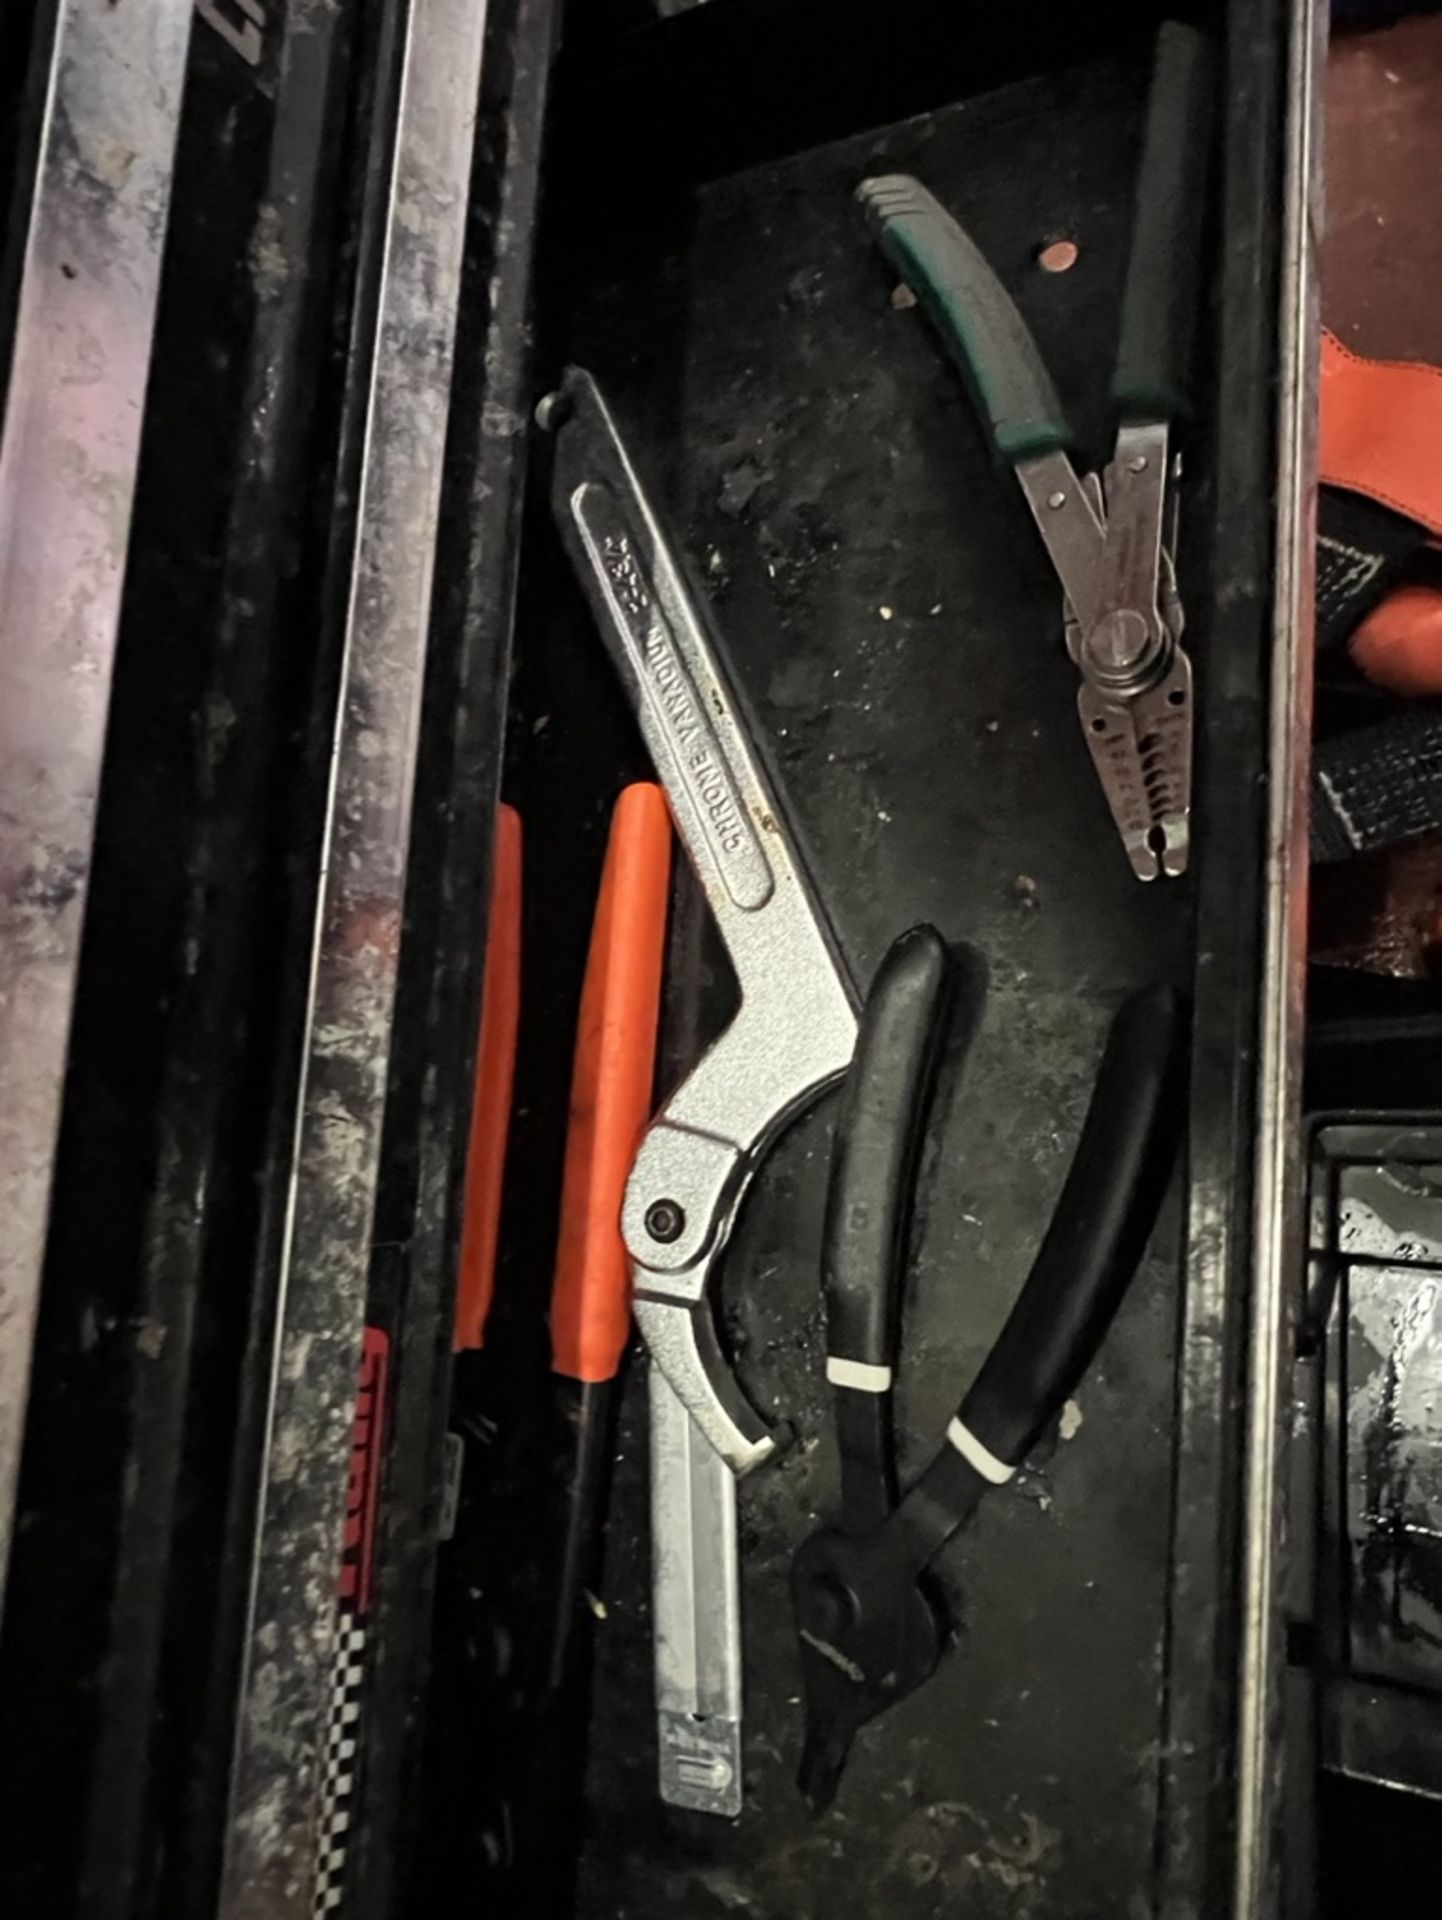 LOT OF: (2) PLASTIC TOOL BOXES, (1) METAL CRAFTSMAN TOOL BOX AND PICTURED SMALL TOOLS, DRILL BITS, - Image 12 of 15